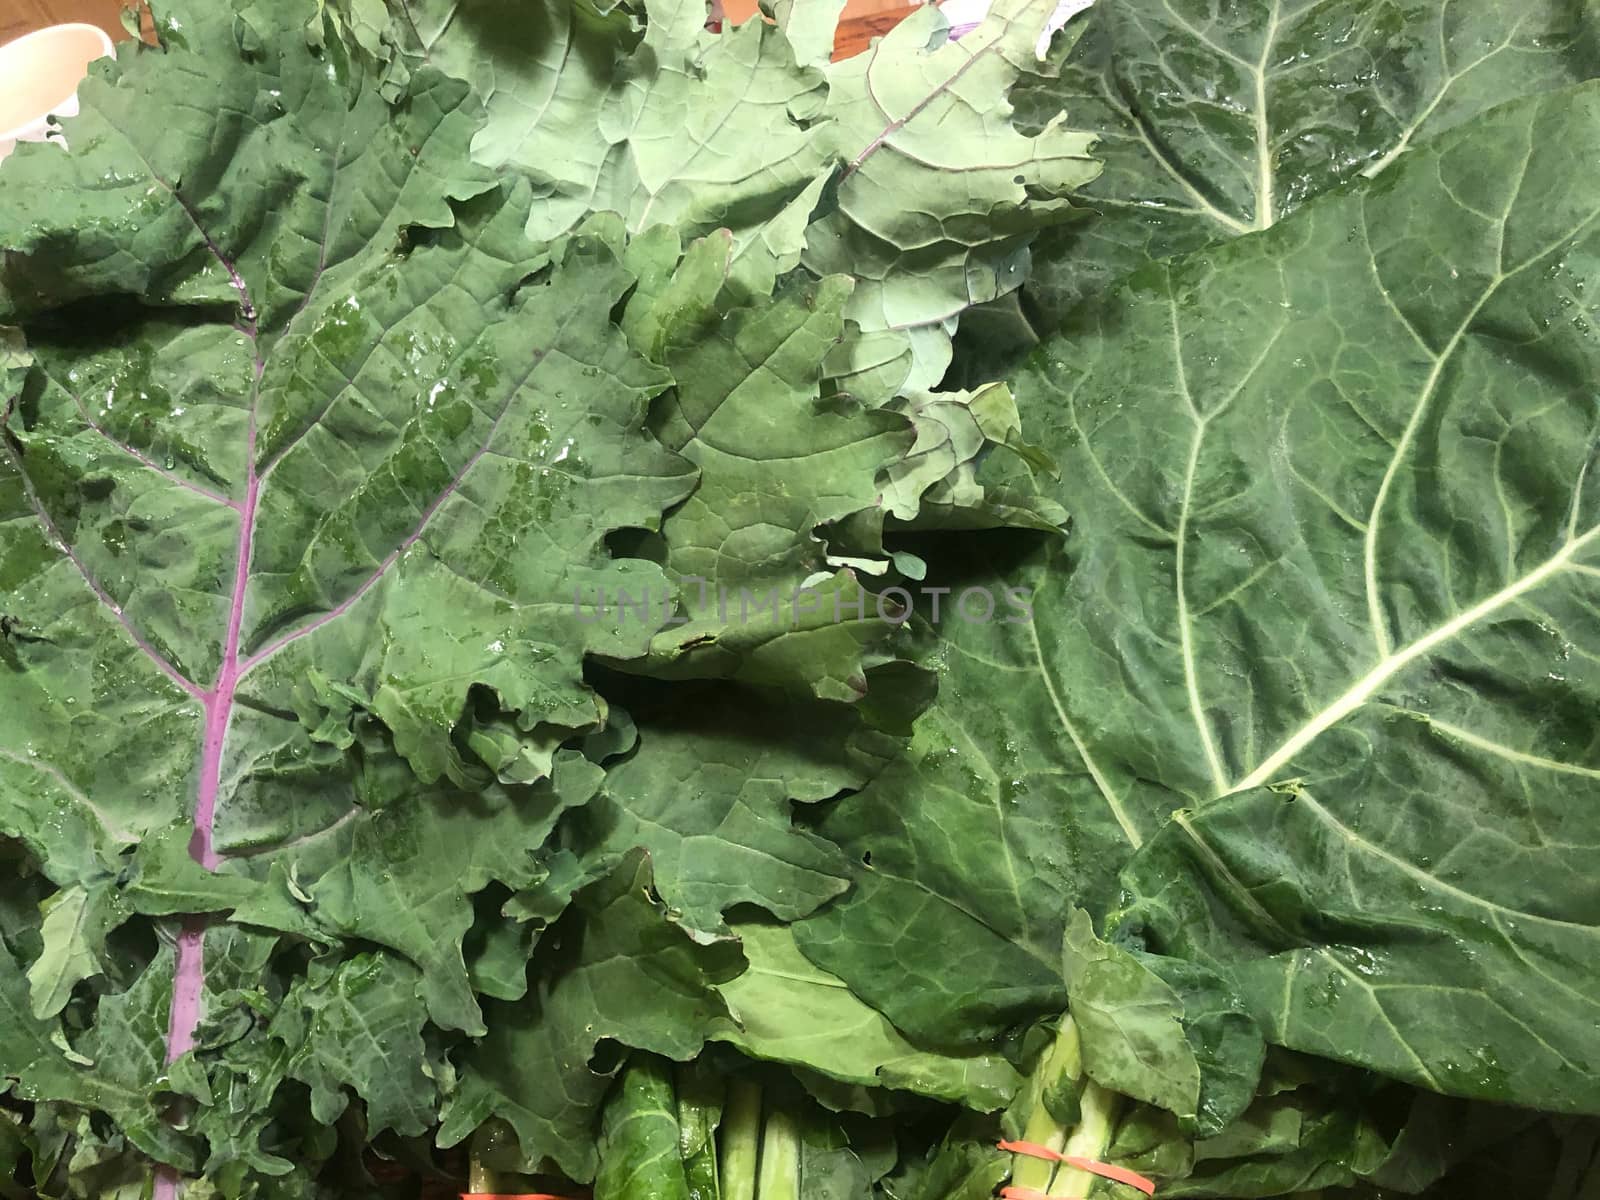 Bright green bunches of fresh farmer's market kale and collard g by marysalen